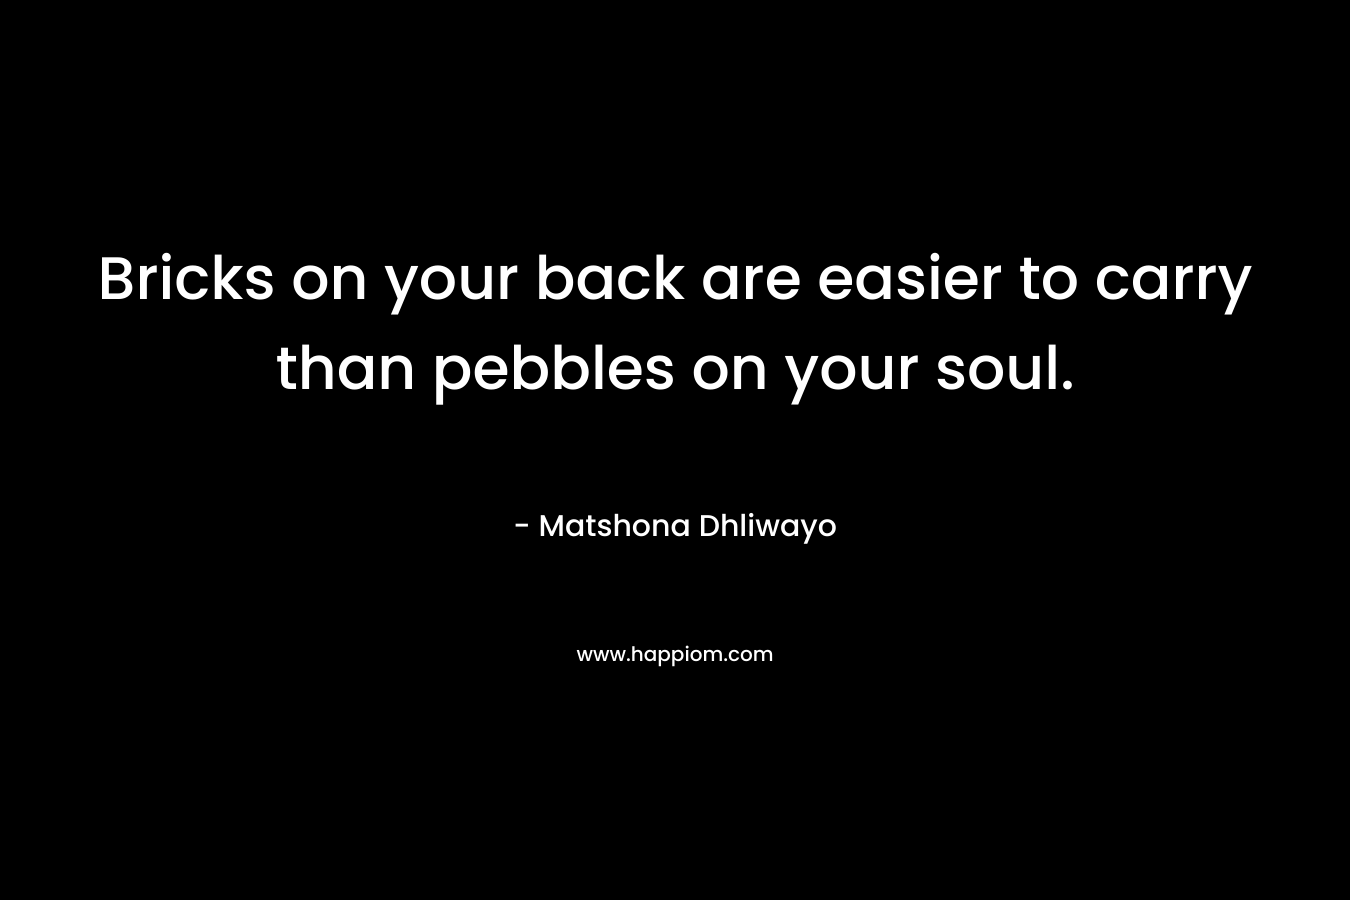 Bricks on your back are easier to carry than pebbles on your soul. – Matshona Dhliwayo